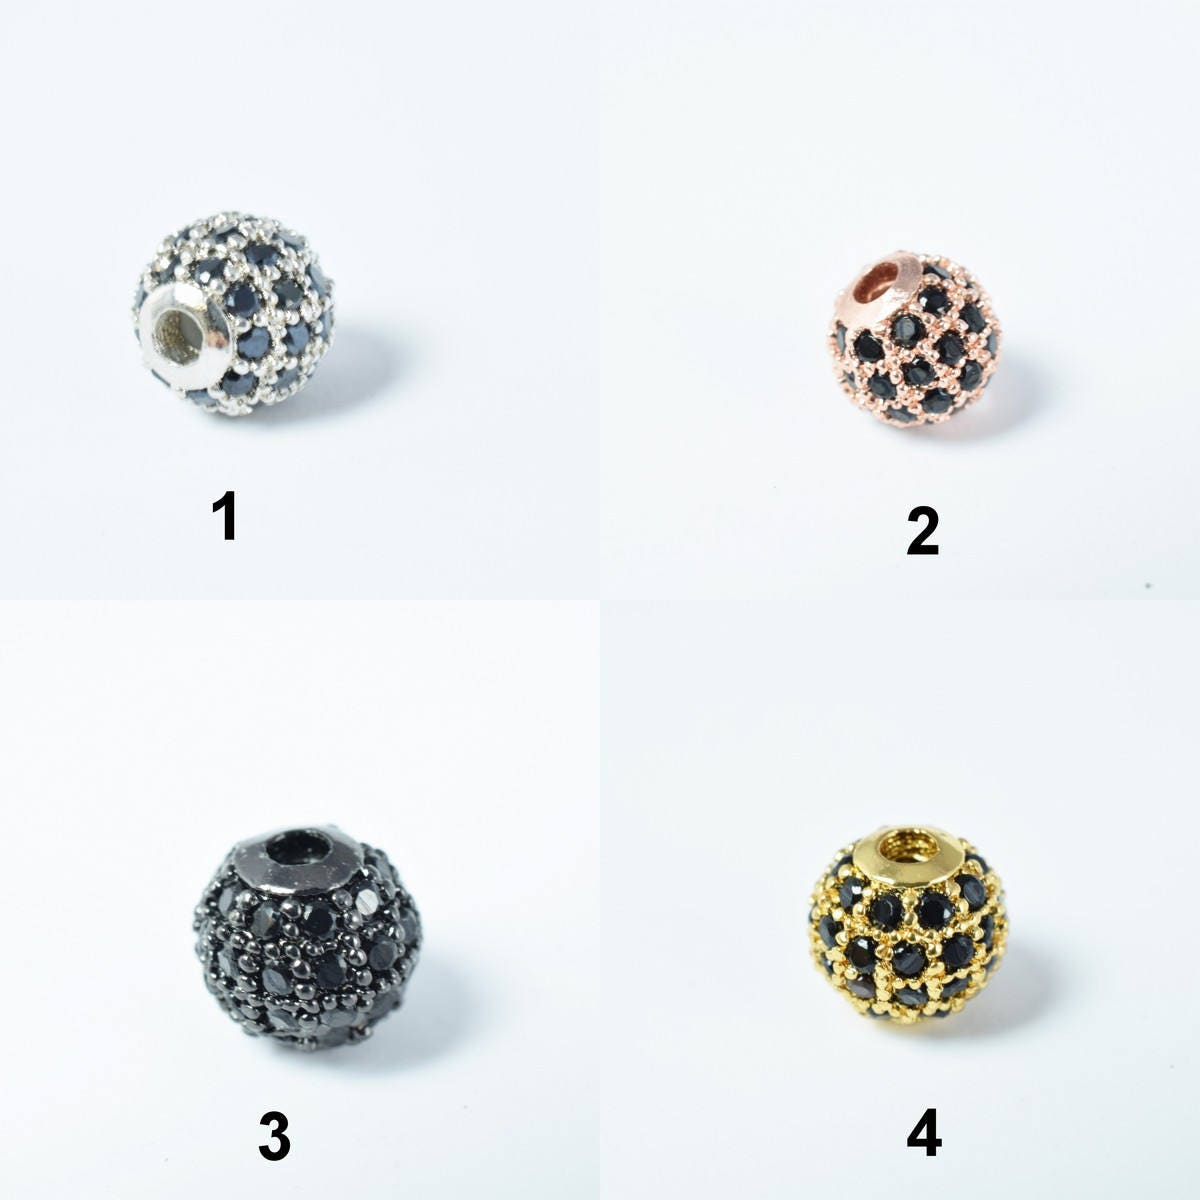 Pave CZ Rhinestone Beads 6mm High Quality 2mm Large Hole Round Bead 4 Colors